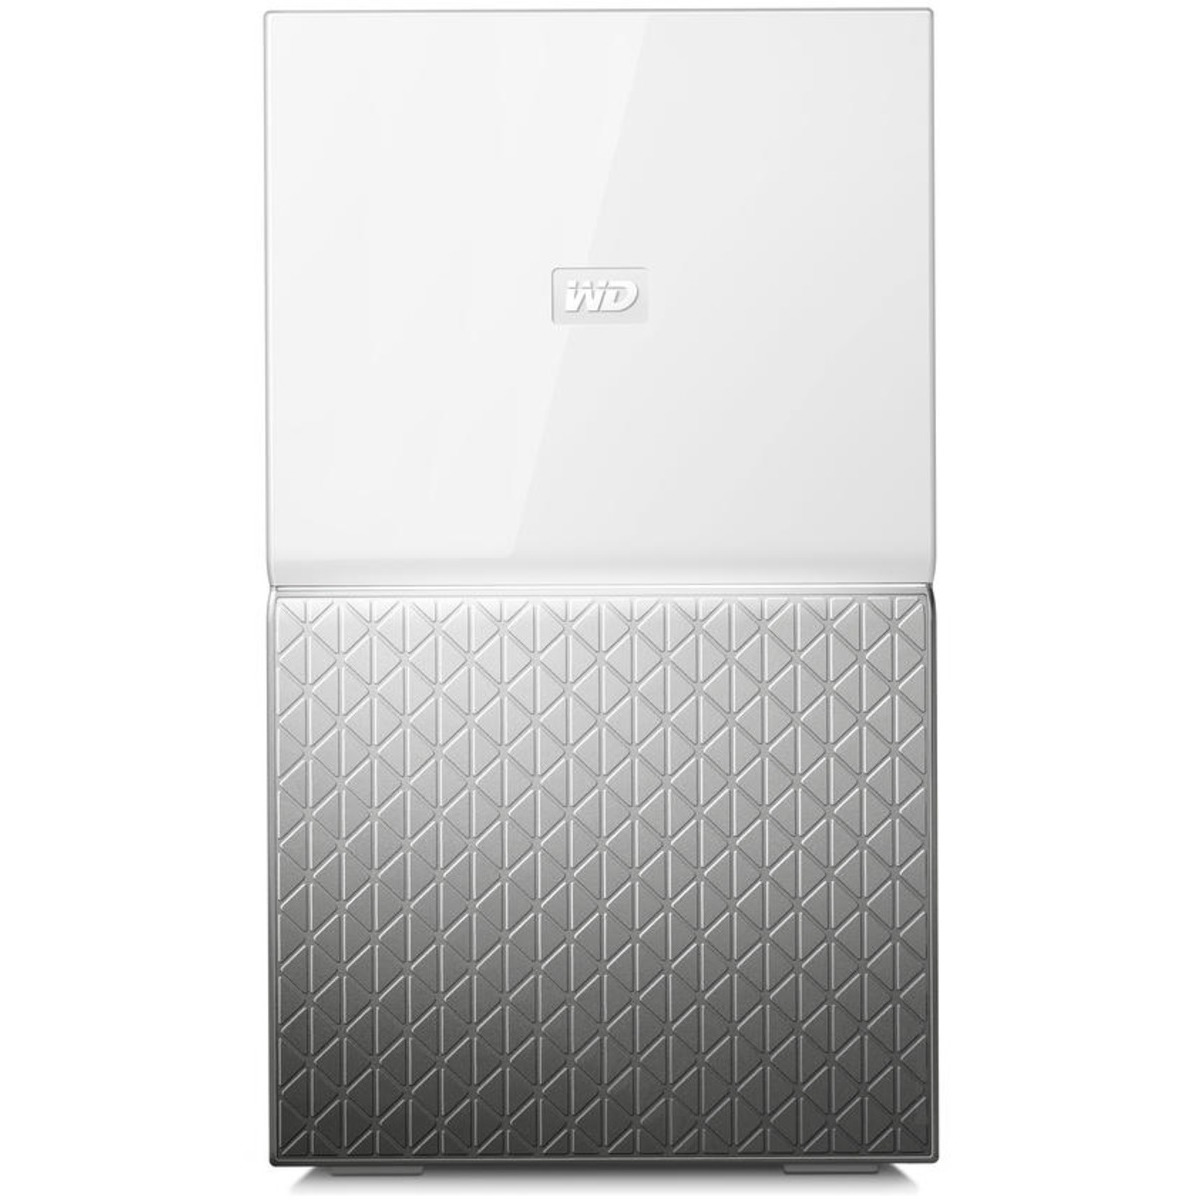 Western Digital My Cloud Home Duo 20tb 2-Bay Desktop Personal / Basic Home / Small Office DAS - Direct Attached Storage Device 2x10tb Western Digital Red Pro WD102KFBX 3.5 7200rpm SATA 6Gb/s HDD NAS Class Drives Installed - Burn-In Tested My Cloud Home Duo